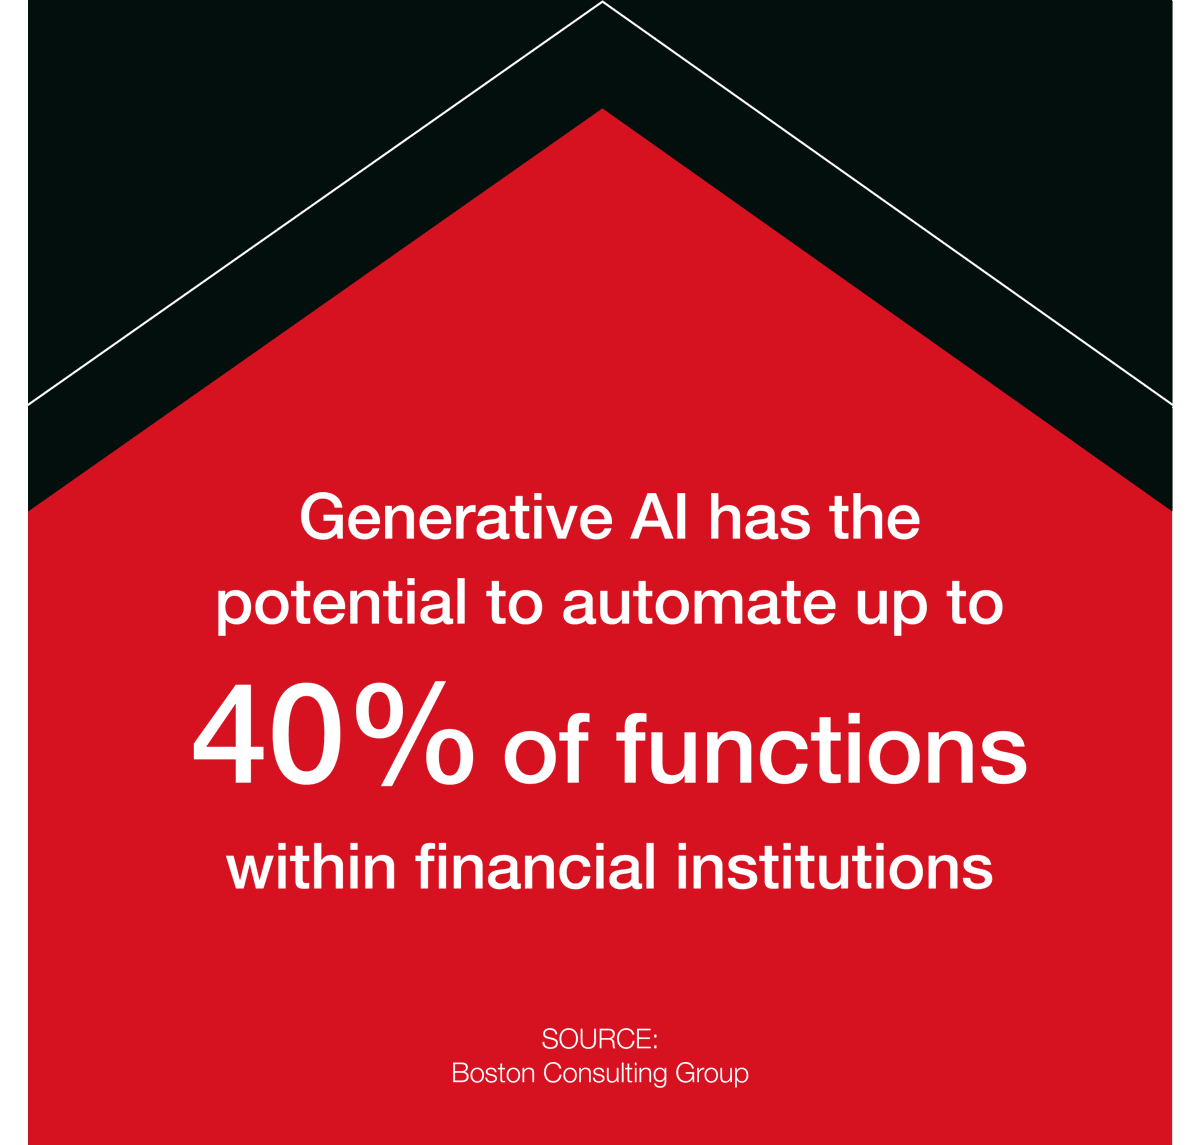 Generative AI is predicted to garner explosive economic value from $2.6 to $4.4 trillion annually. How could this impact financial institutions? Watch our webinar replay to find out: bit.ly/3TXqm80 #dlxdata